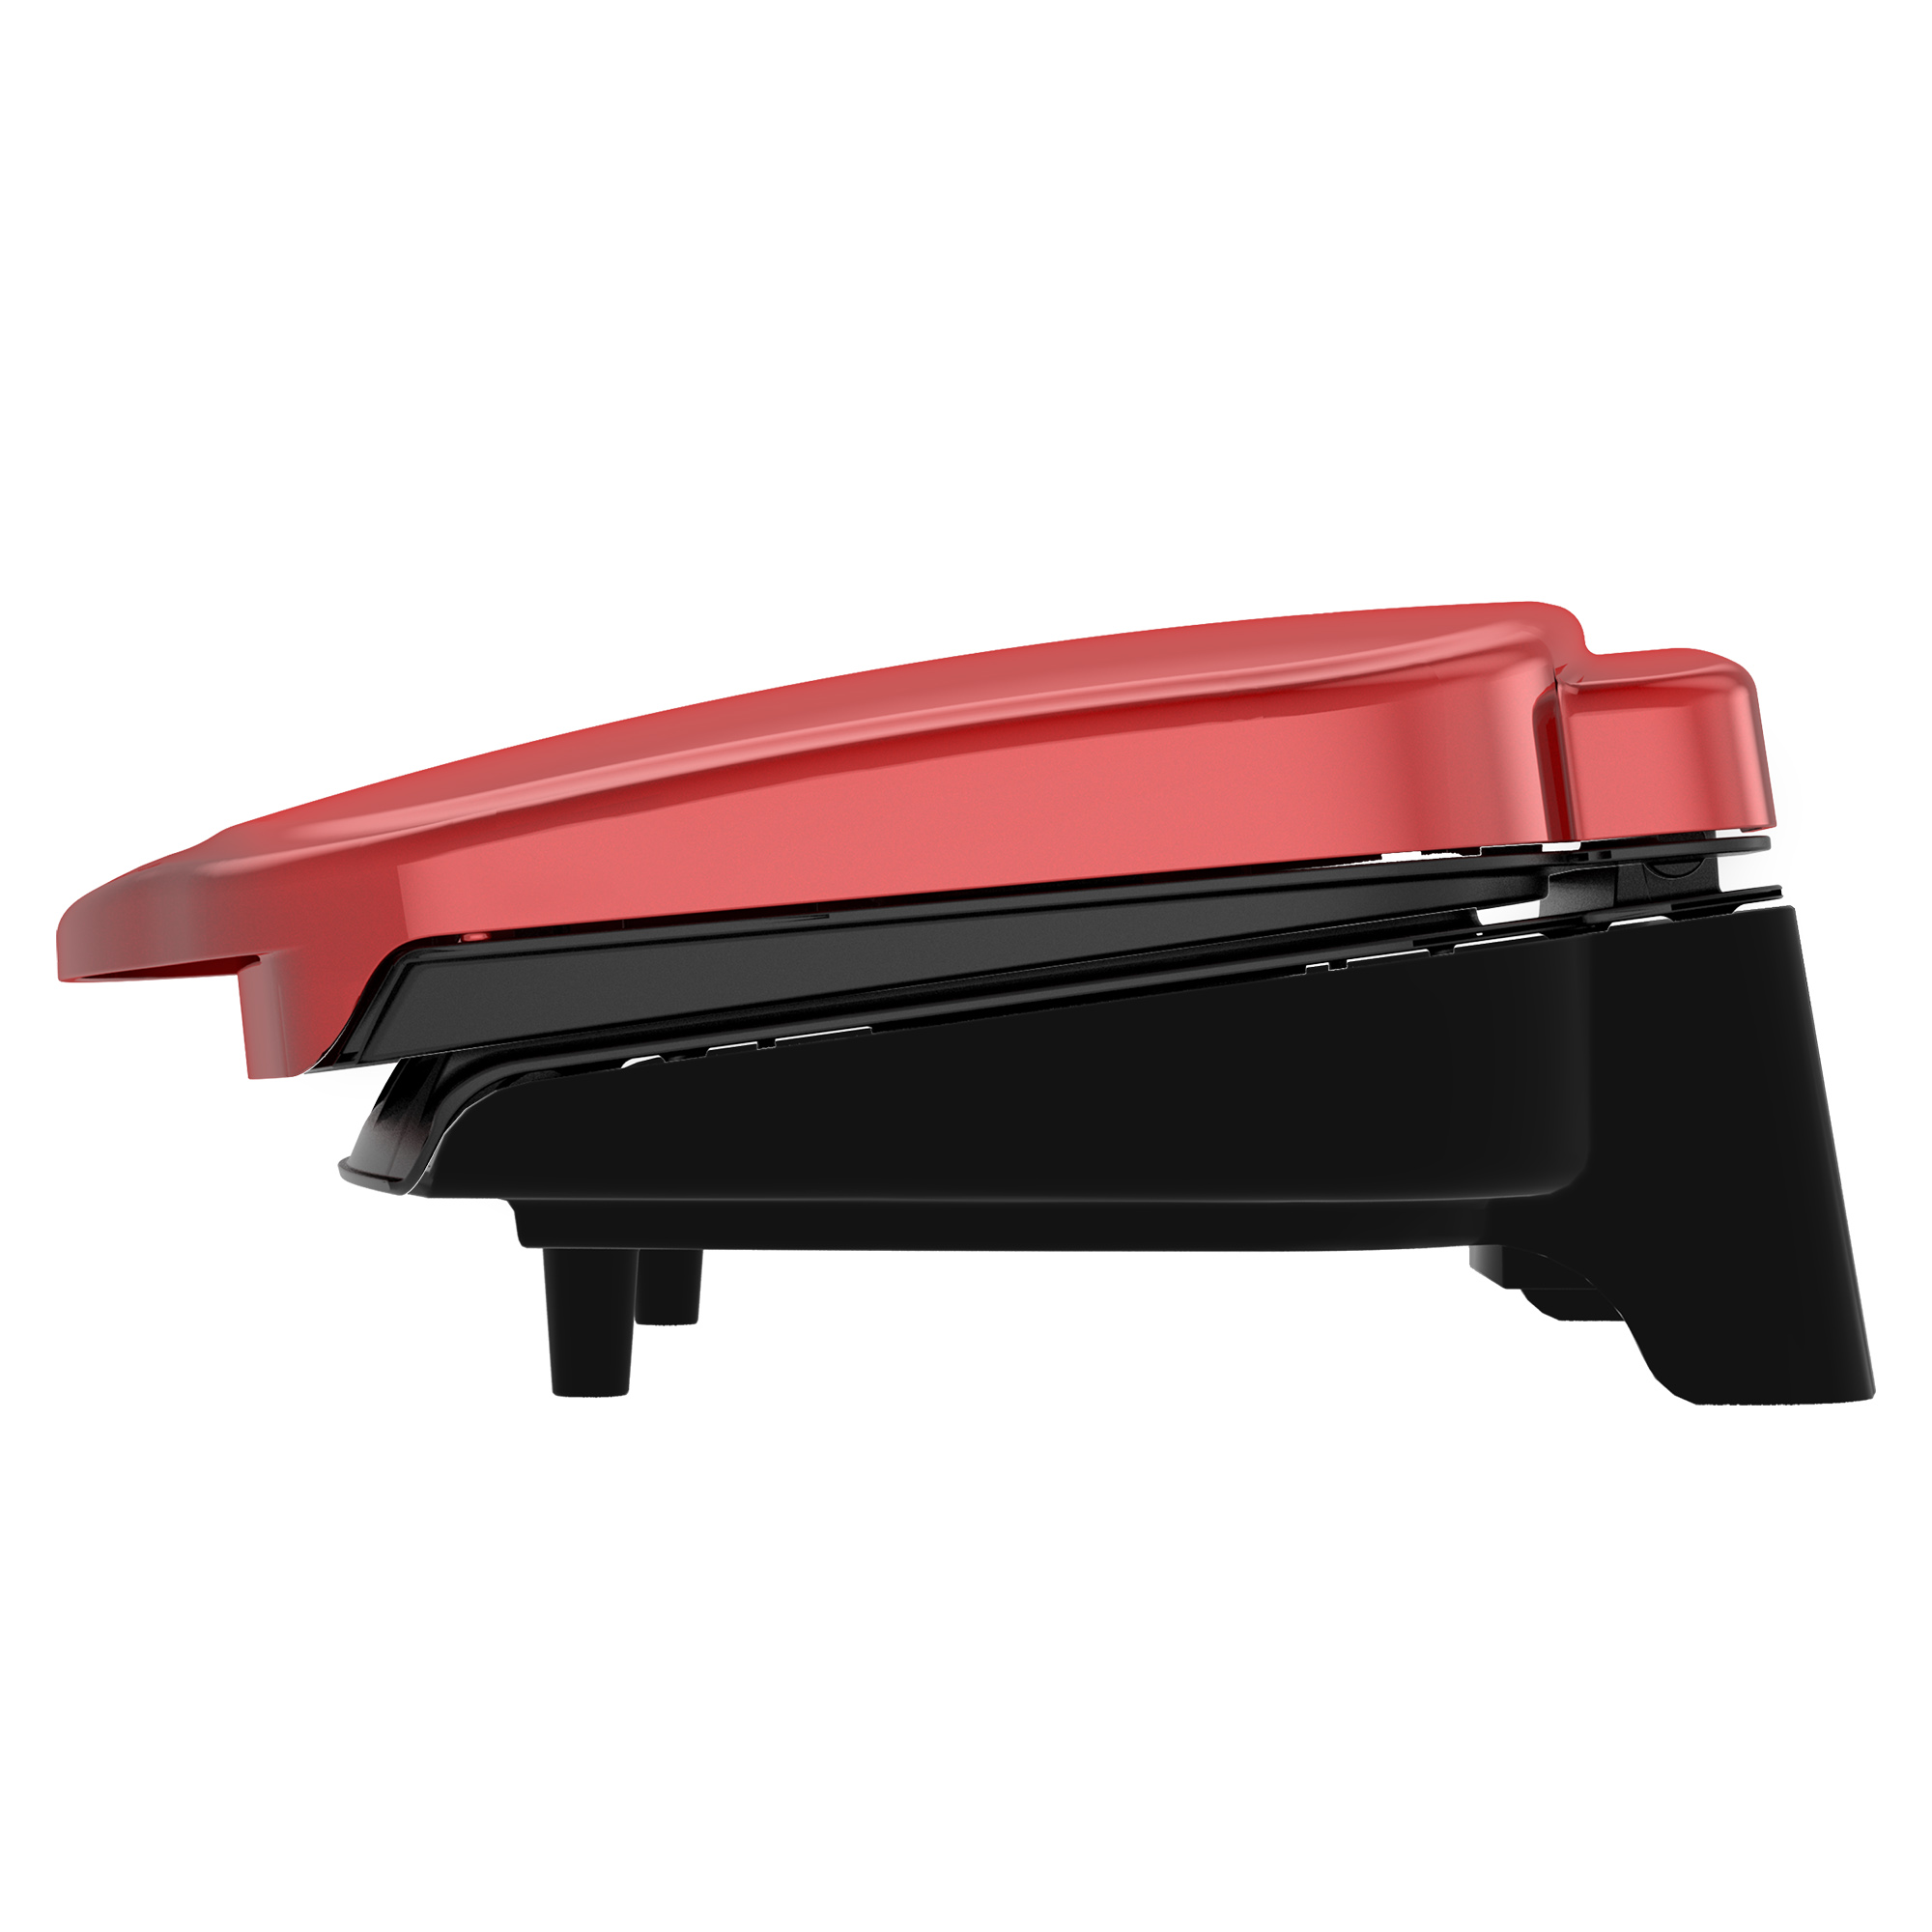 George Foreman 2-Serving Classic Plate Electric Indoor Grill and Panini Press, Red, GR10RM - image 5 of 11